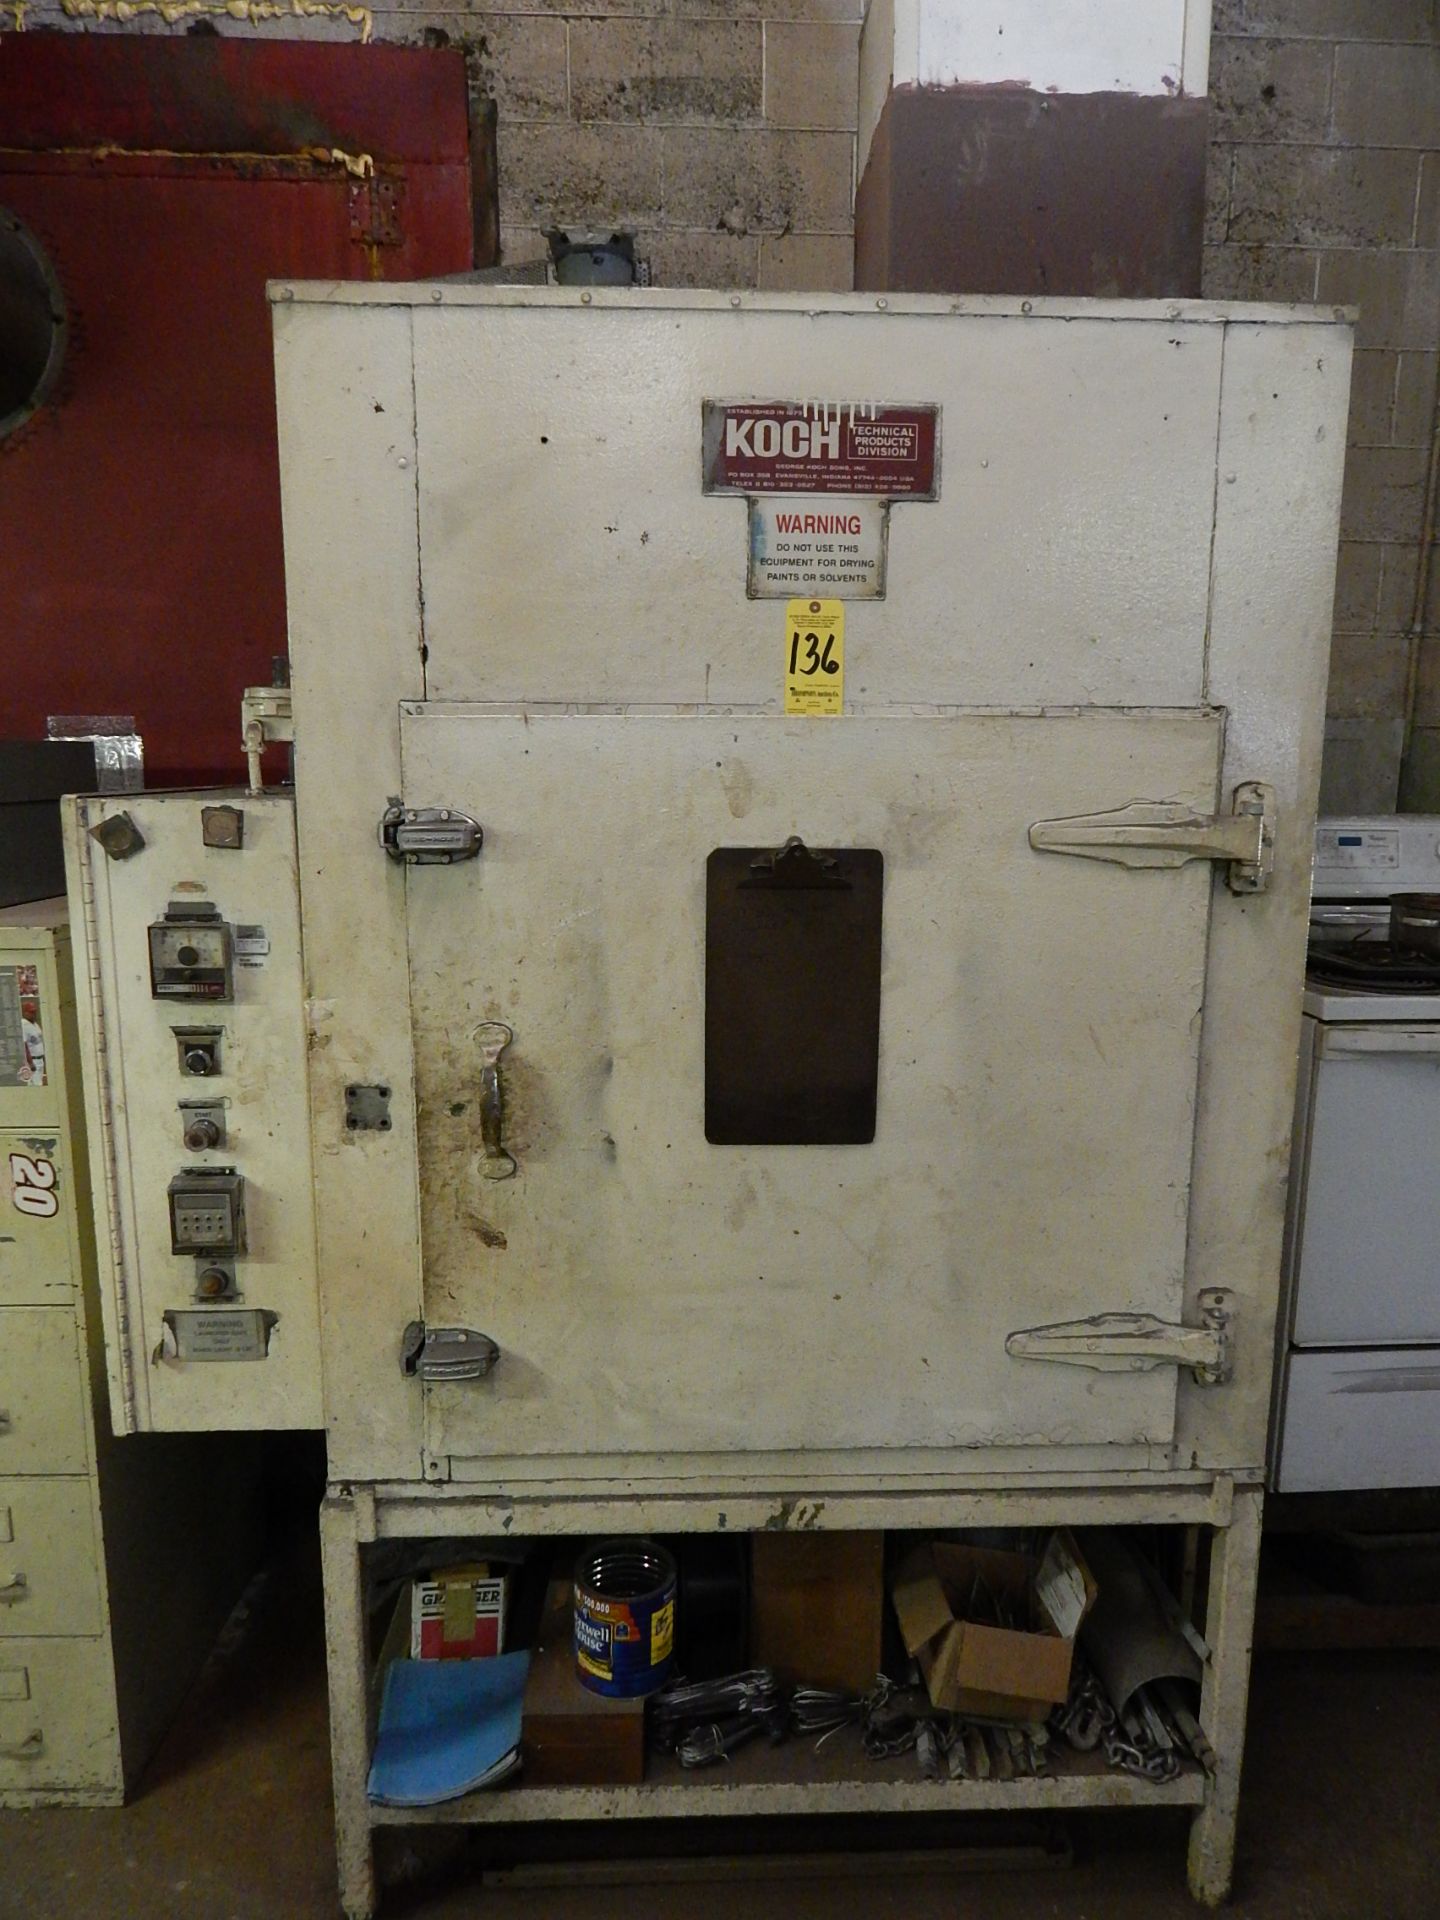 Koch Model HCE-333 Electric Oven, s/n 936-1440, with Blower Exhaust